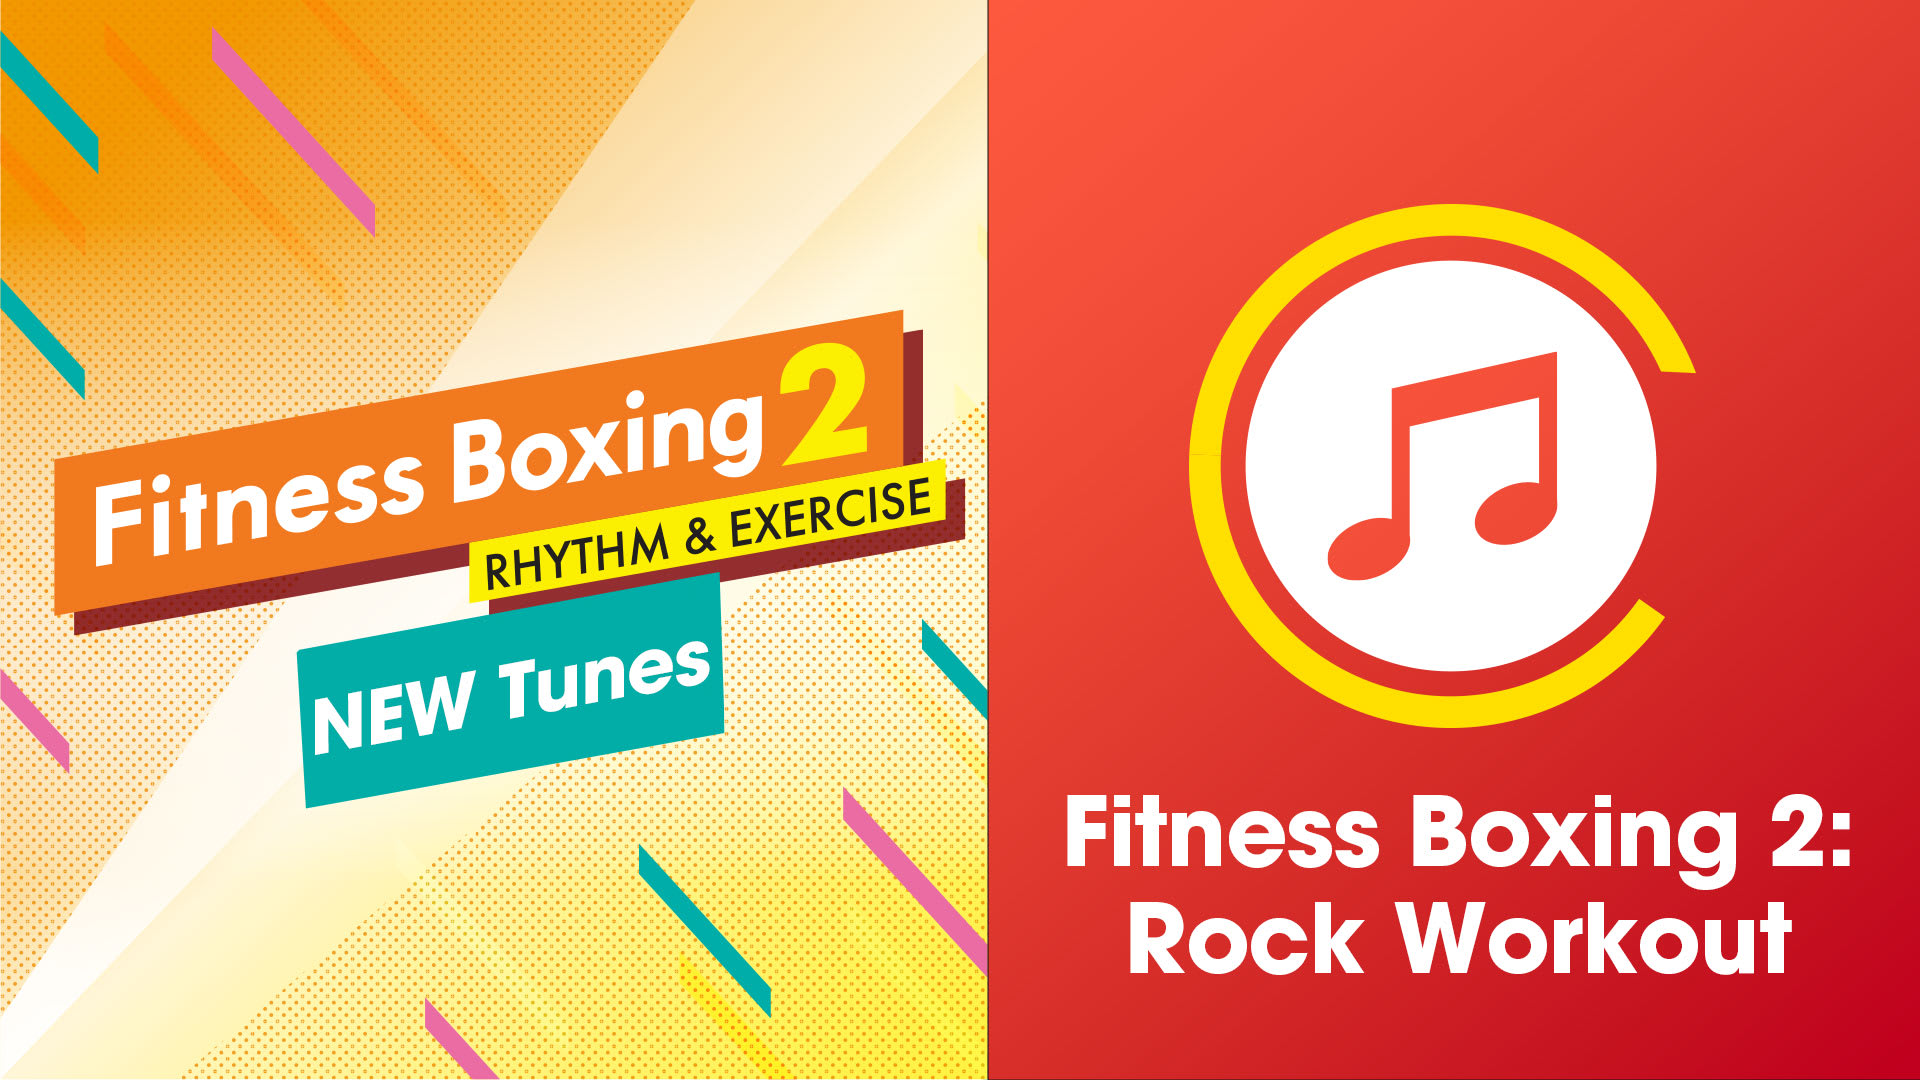 Fitness Boxing 2: Rock Workout